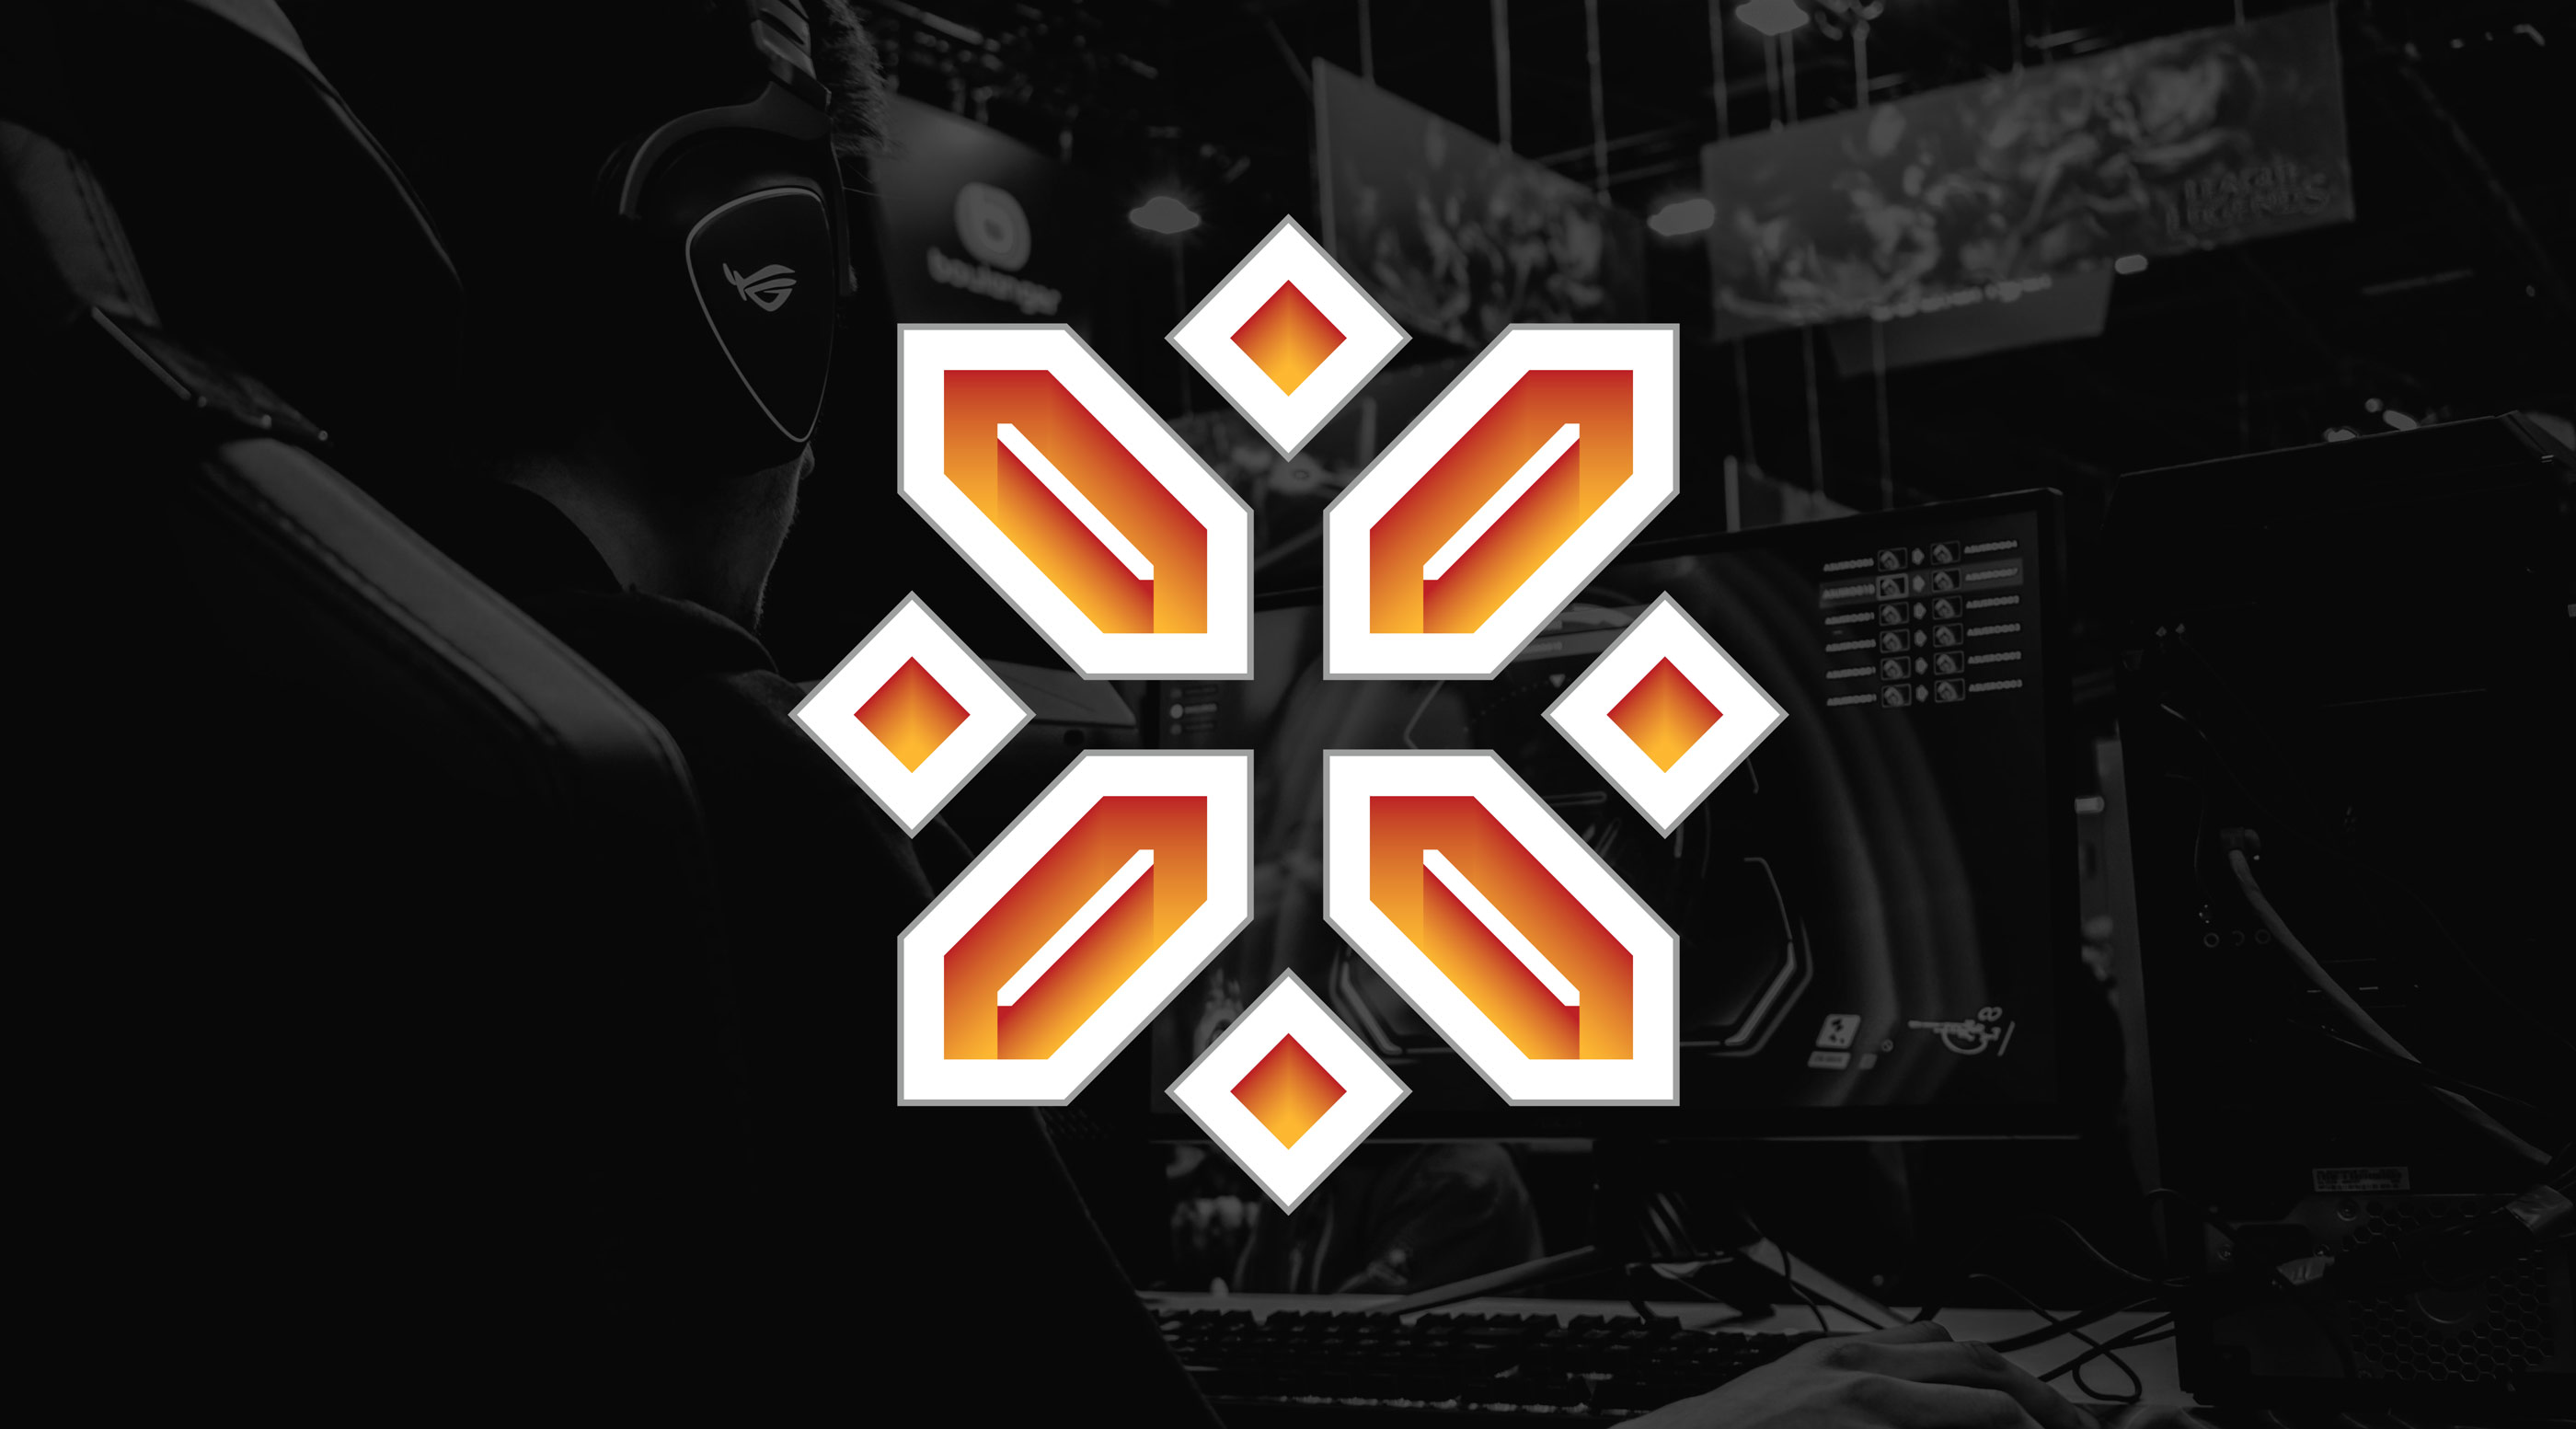 An orange and white esports logo design mark superimposed over an image of an esports event, By Karbon Branding